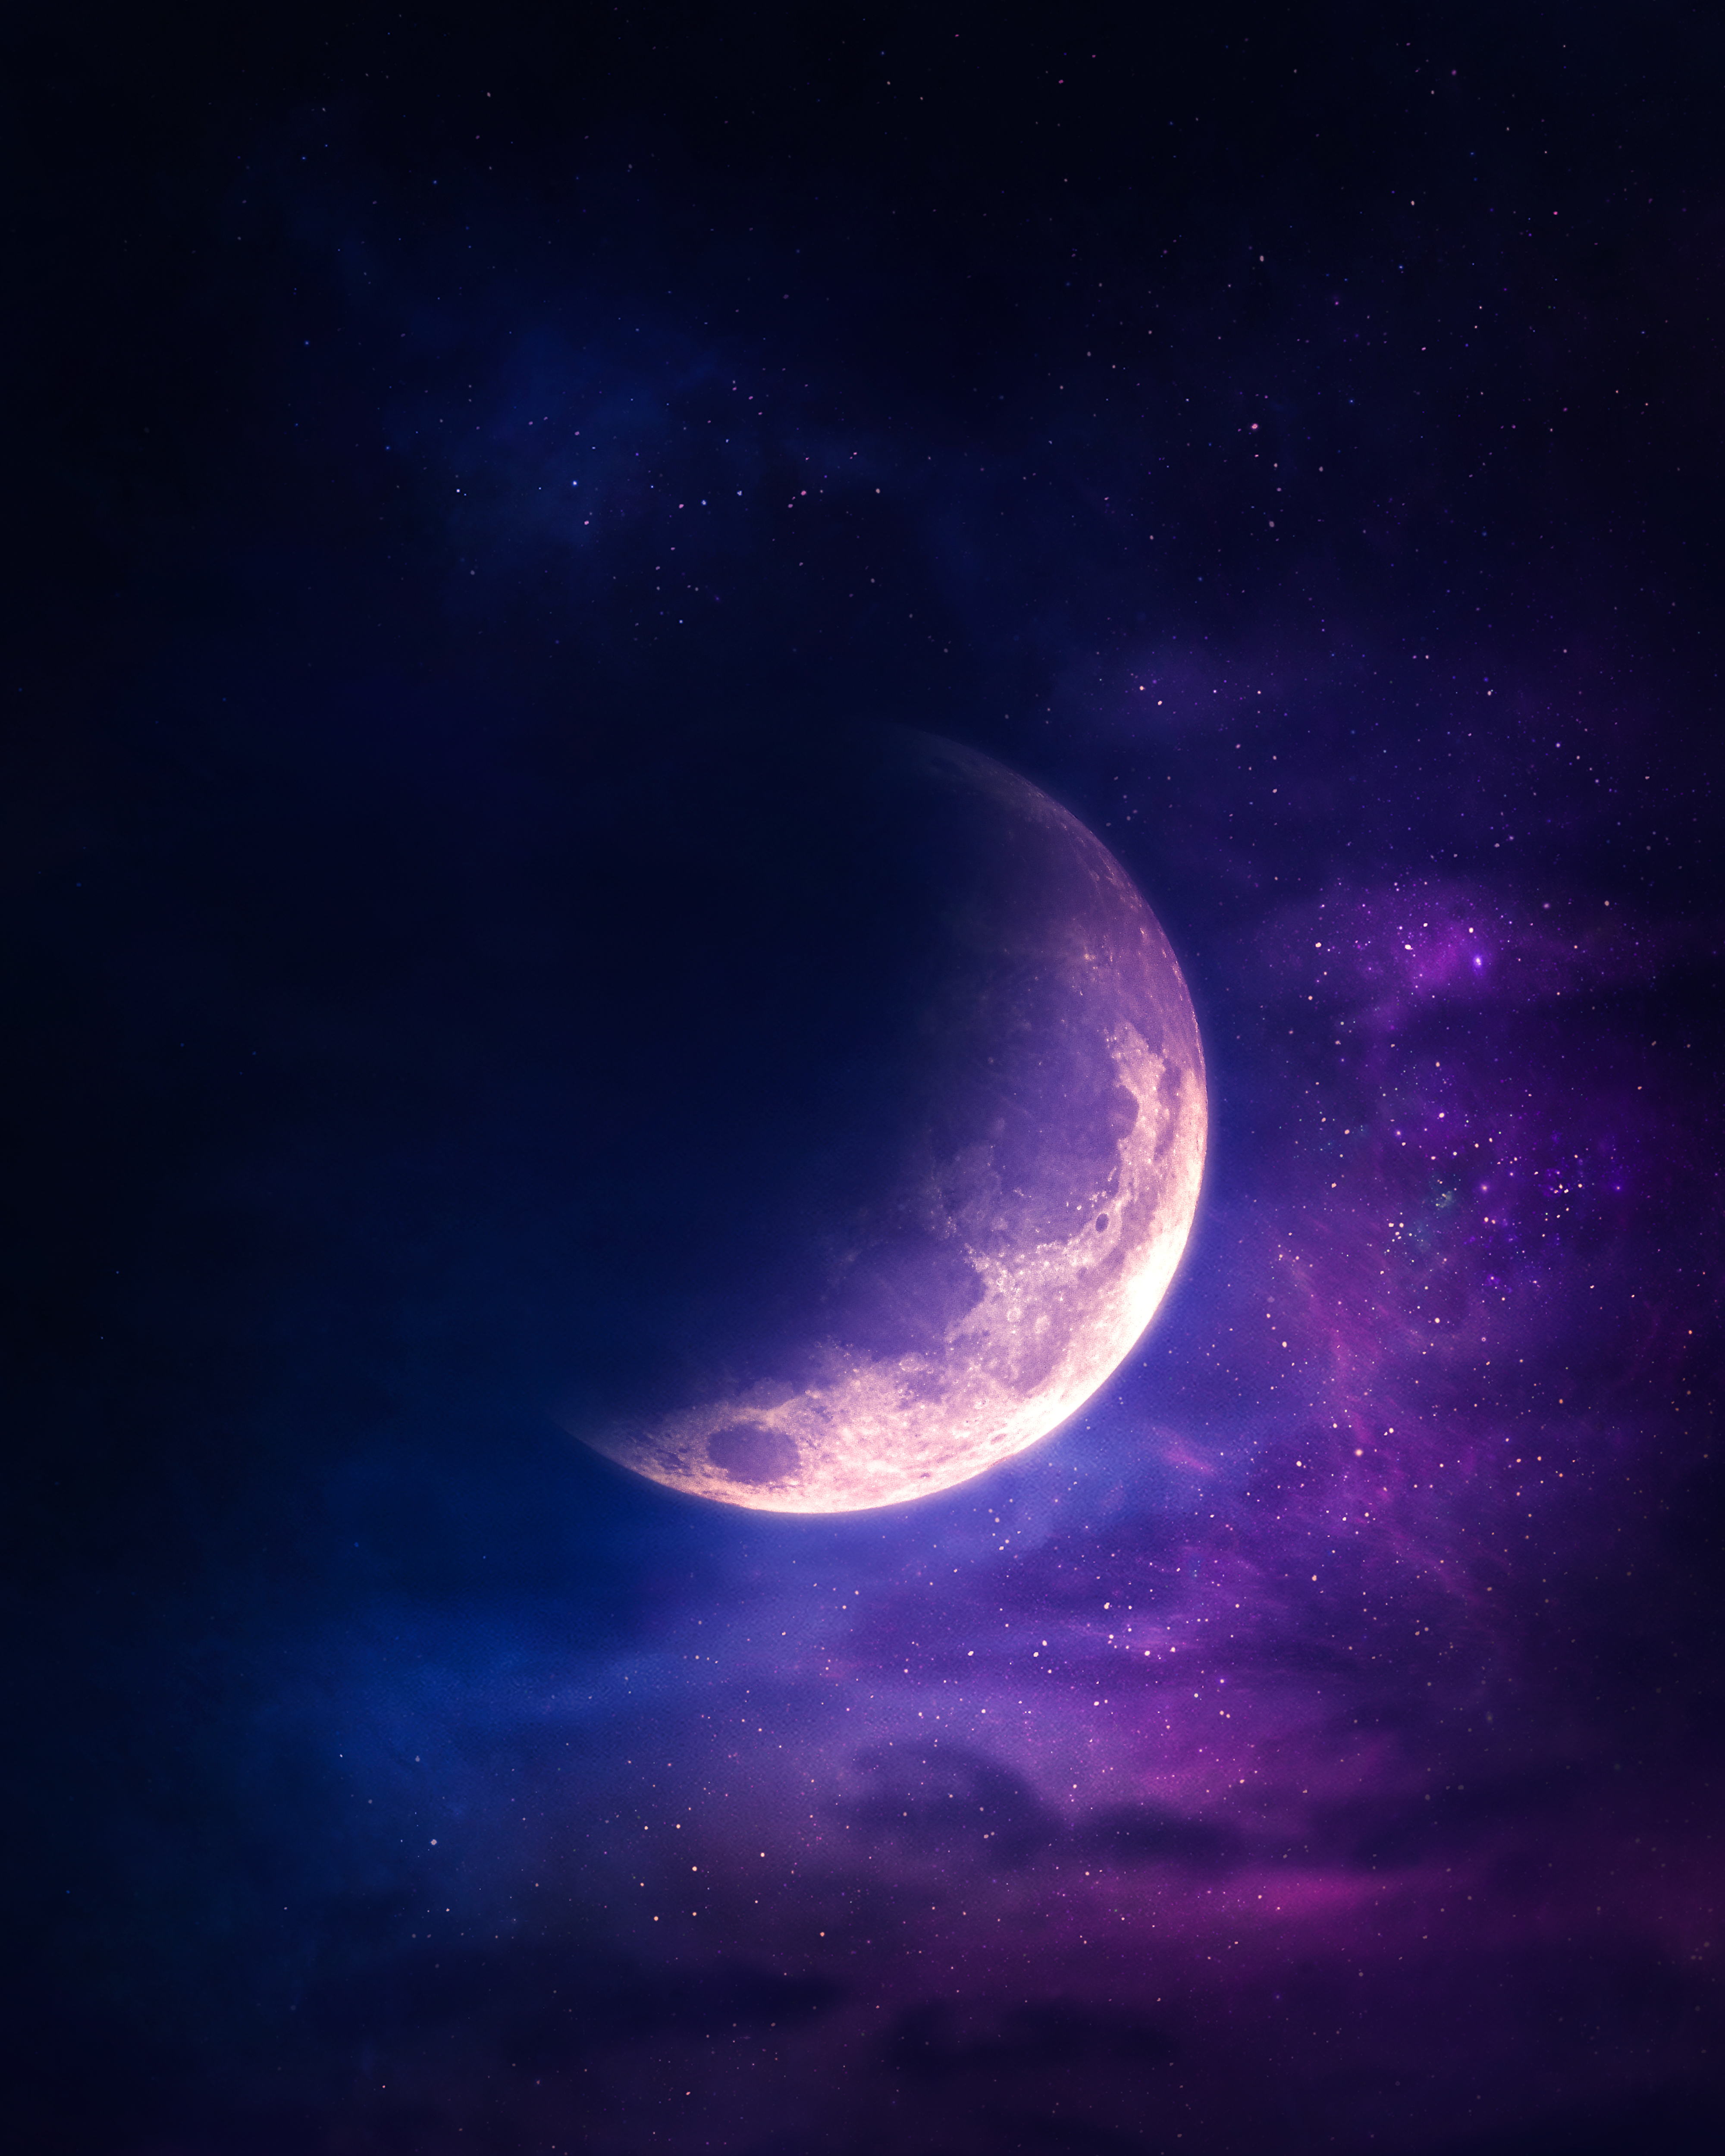 Download Cute Cat Aesthetic And Crescent Moon Wallpaper